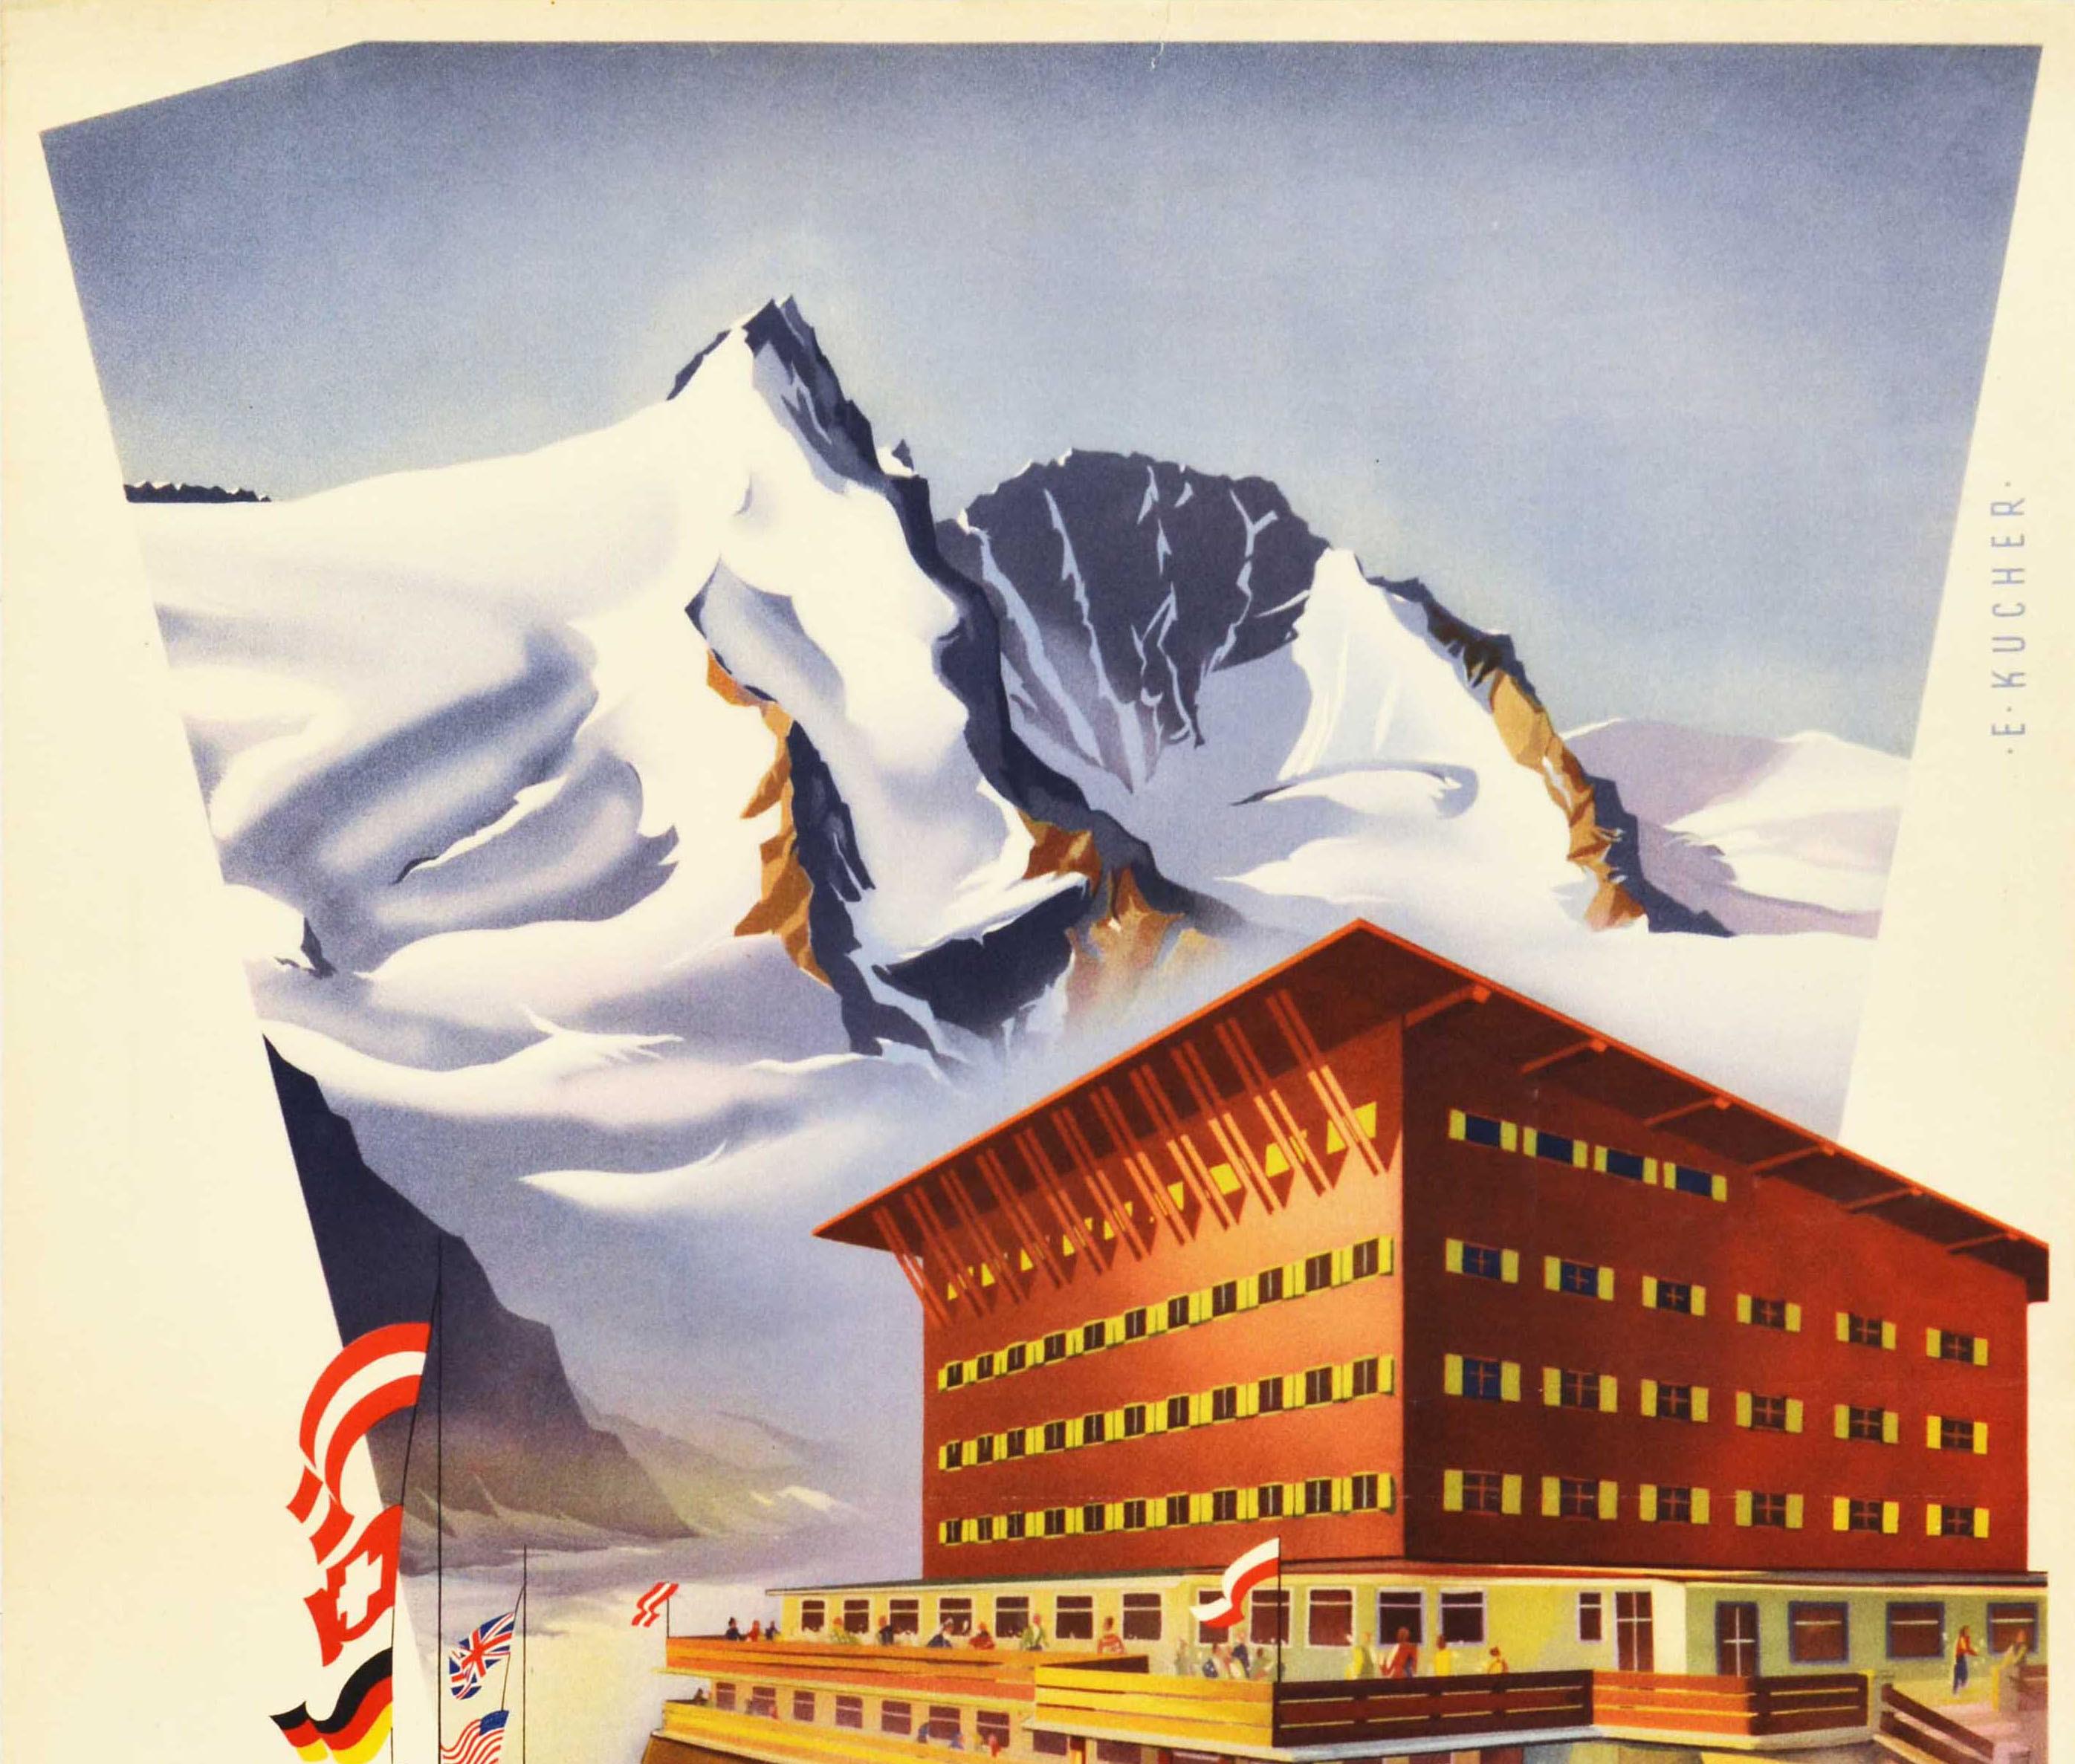 Original vintage winter sport ski travel poster for Karnten Austria Grossglockner 3798m Alpenhotel Kaiser-Franz-Josef-Haus featuring stunning artwork of the alpine hotel with people on the sun terrace enjoying the view of the Pasterze Glacier and